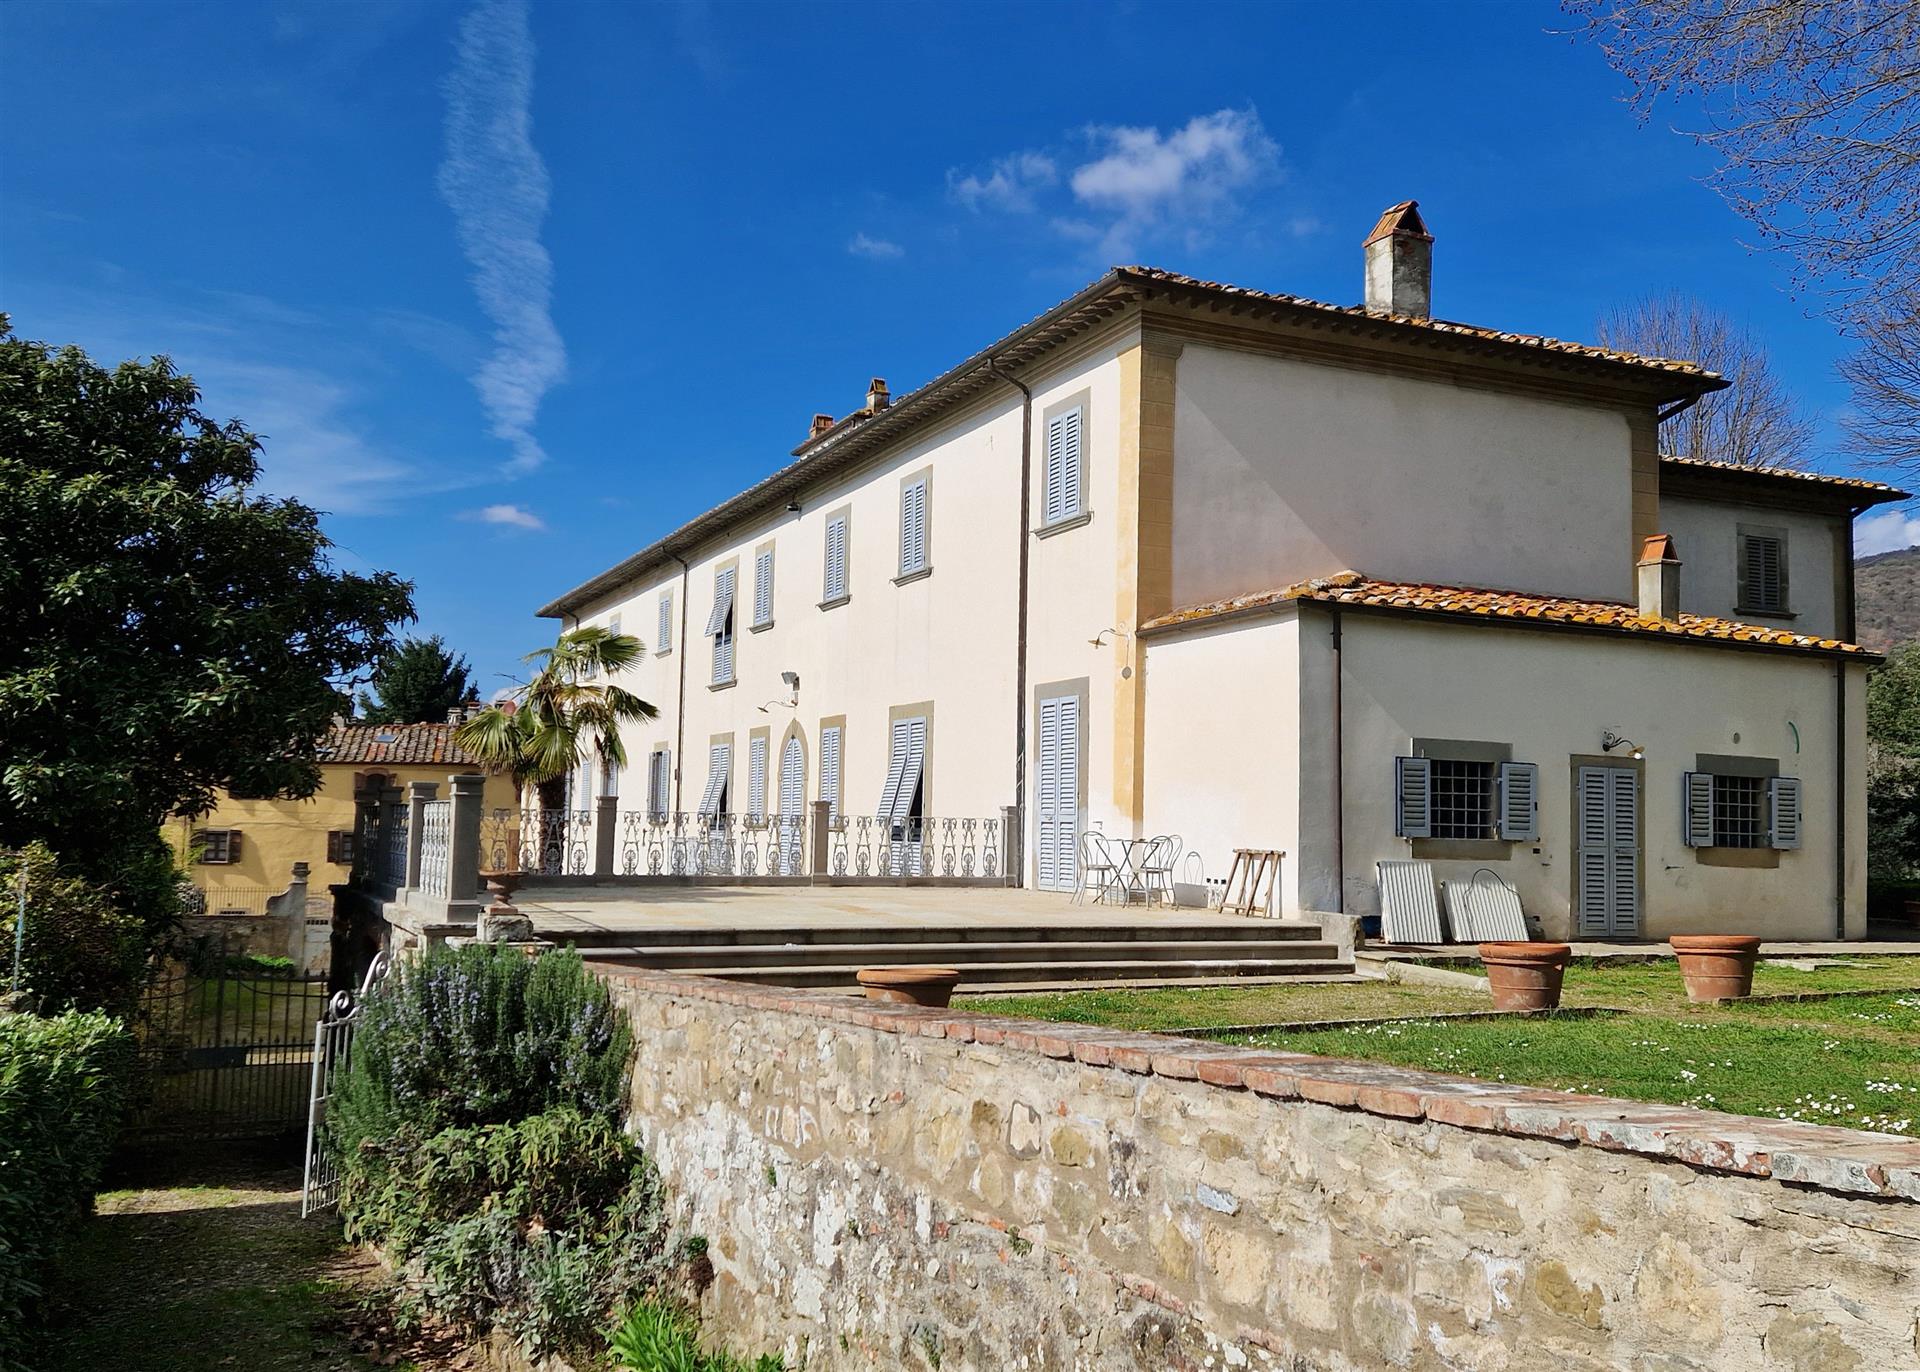 Restored centuries old villa surrounded by gardens and park with monumental trees